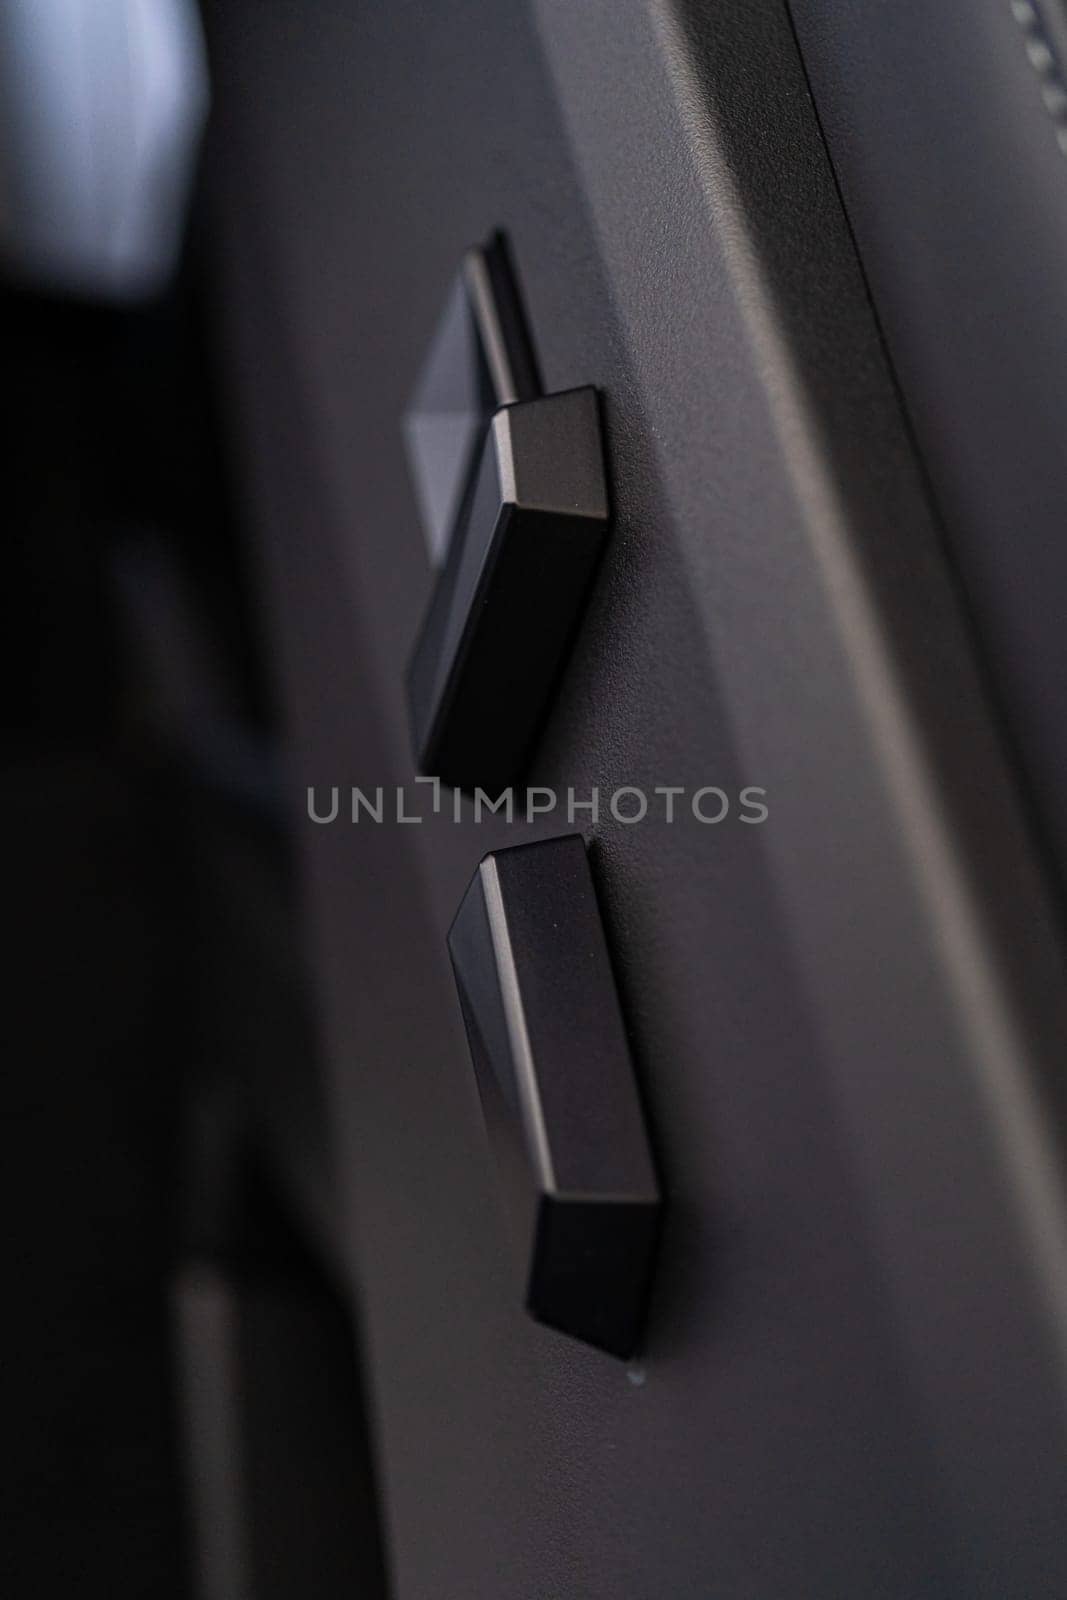 Denver, Colorado, USA-May 5, 2024-This image captures a close-up view of the seat adjustment buttons located in the Tesla Cybertruck, emphasizing the minimalist and sleek design of the vehicle interior controls.